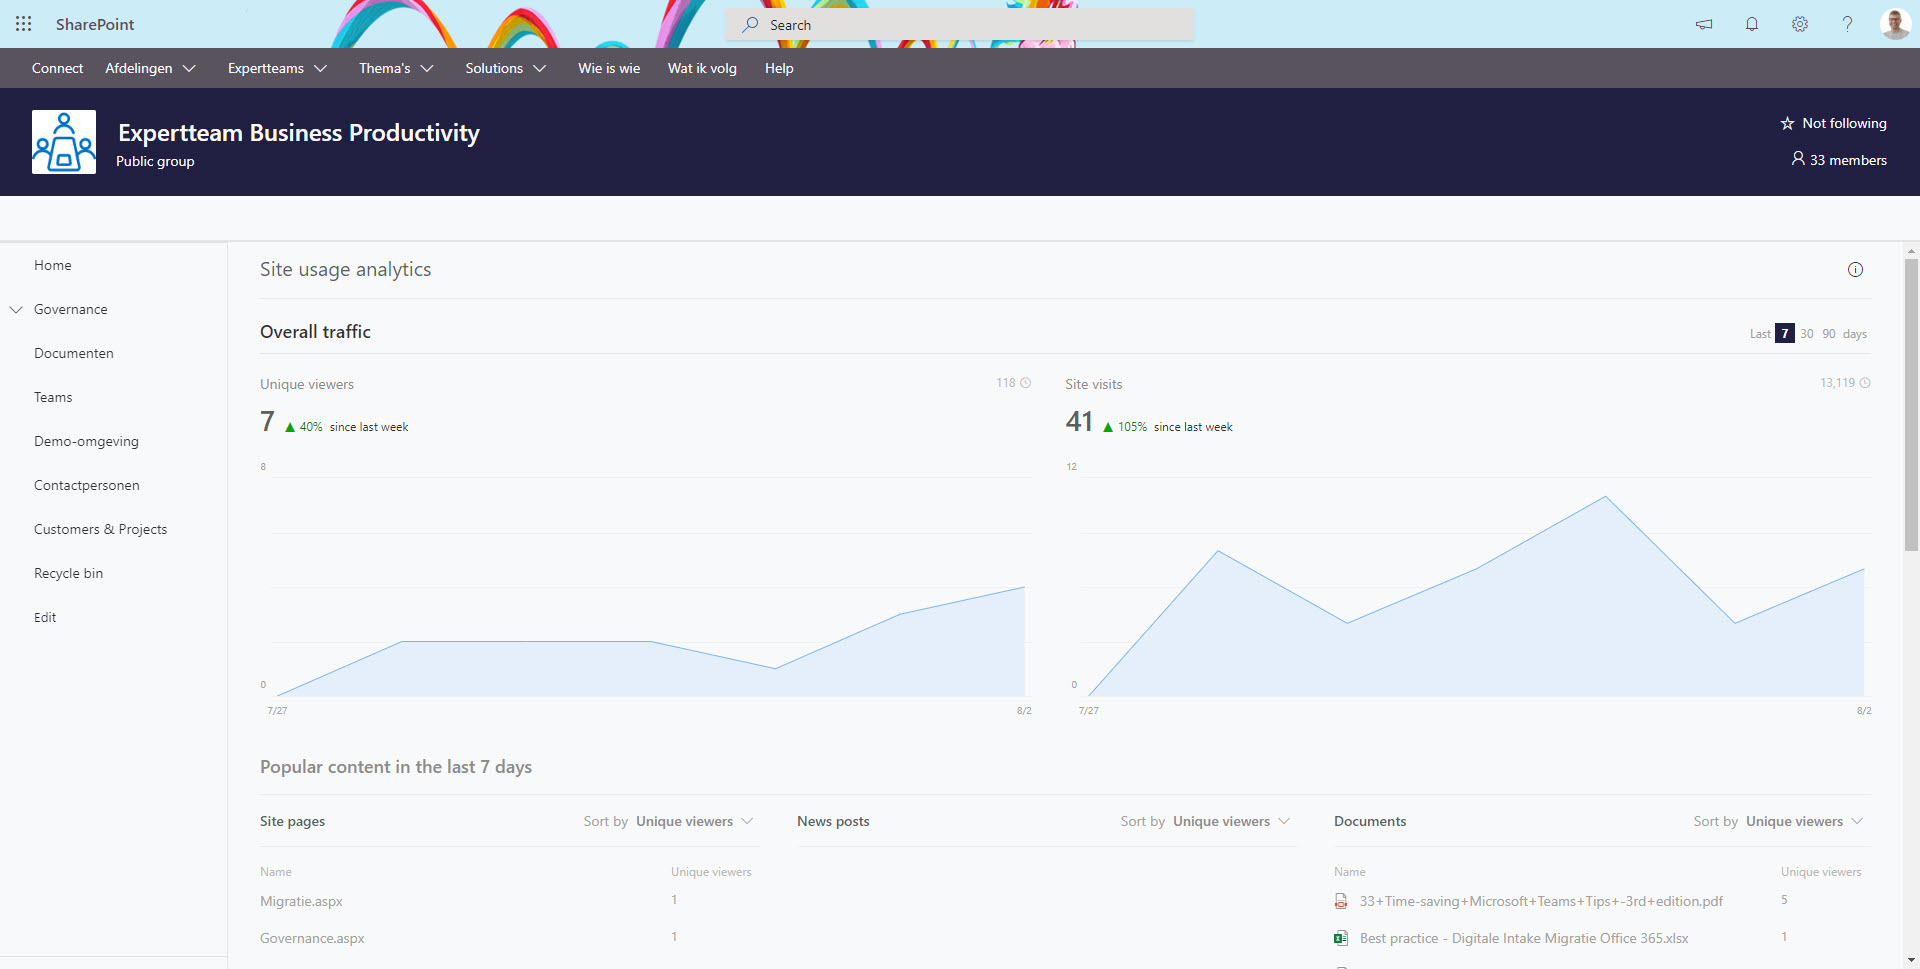 Image of site usage analytics page.